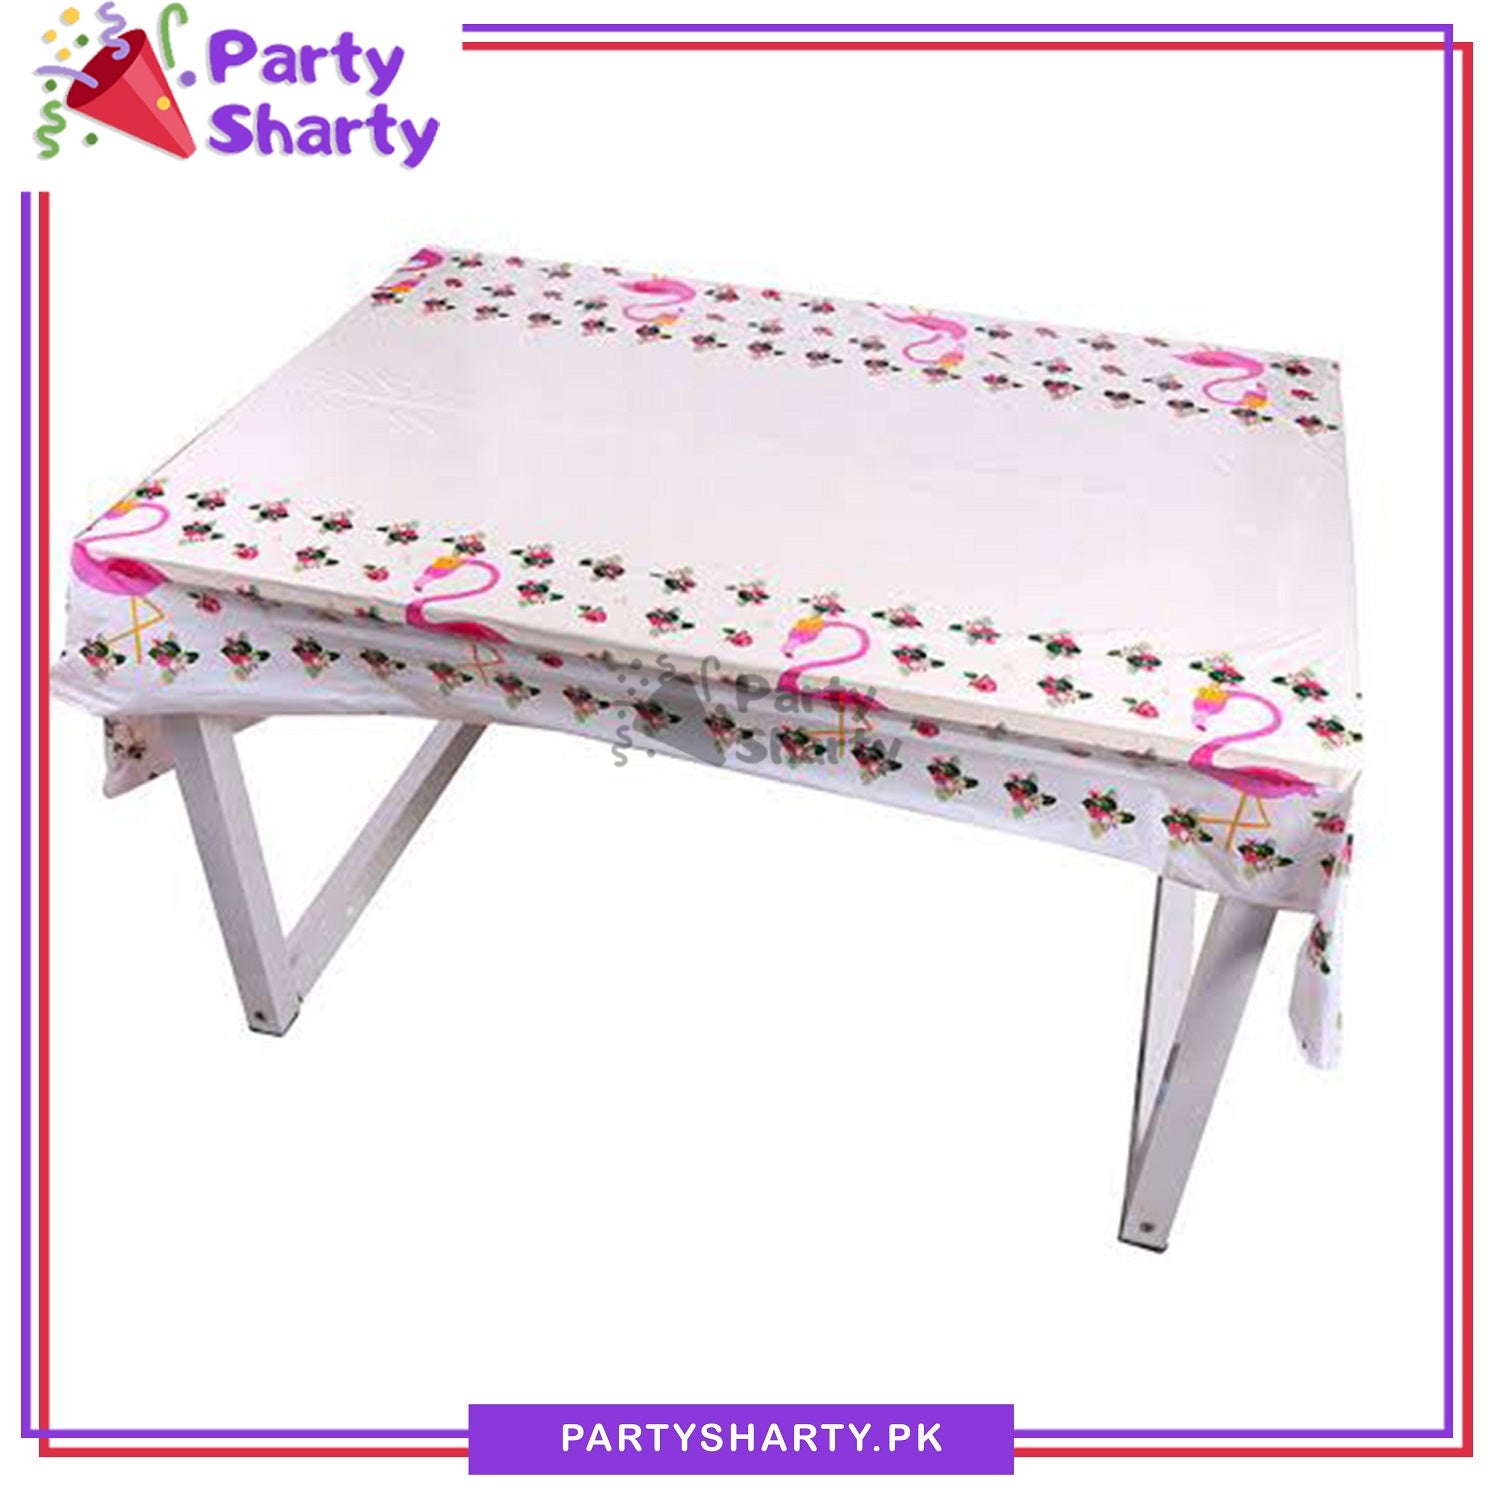 Flamingo Party Theme Table Cover for Birthday Party and Decoration